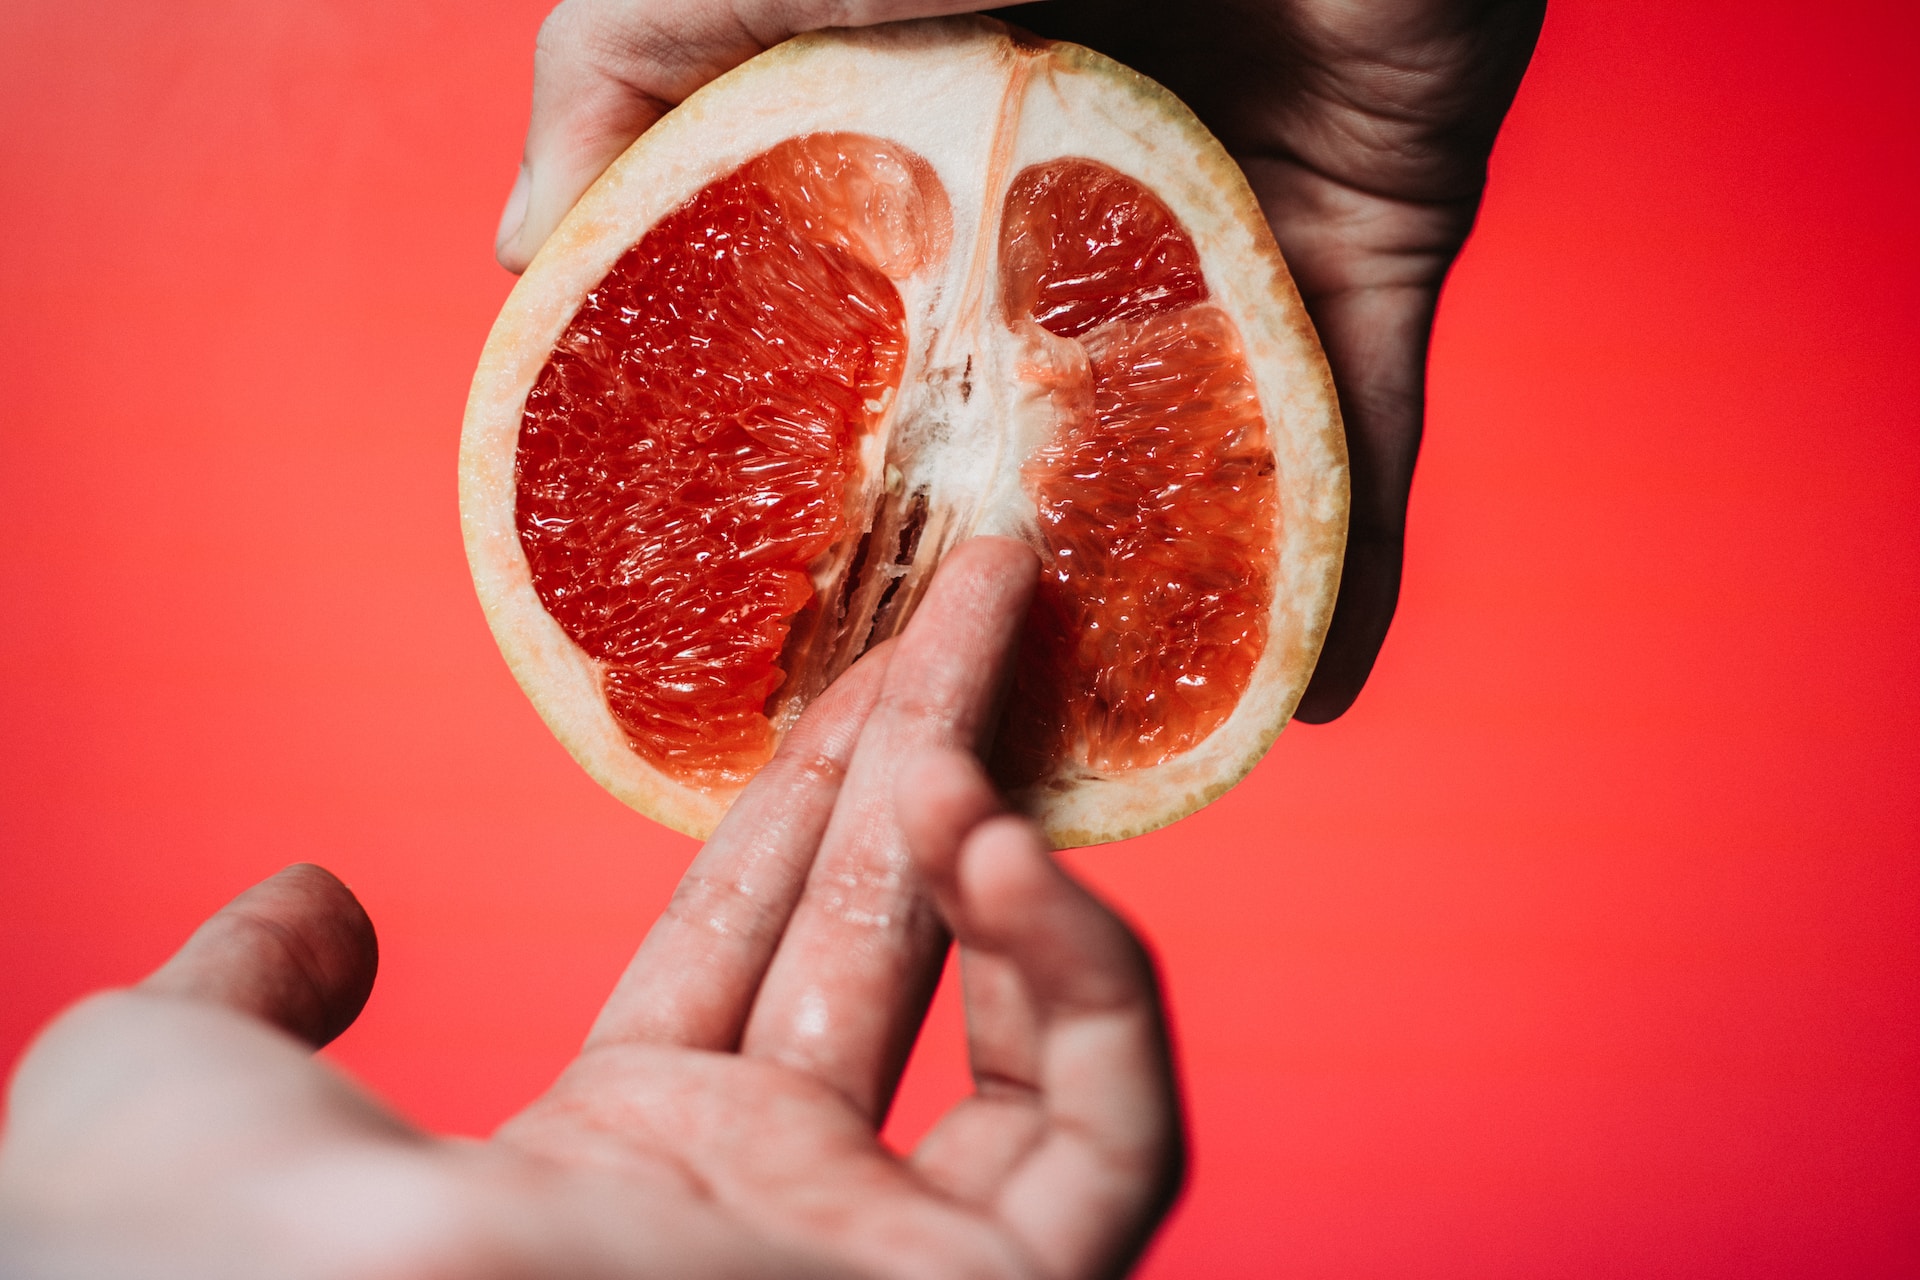 The picture shows a finger entering a grapefruit which should symbolize the idea of someone having sex during their period.